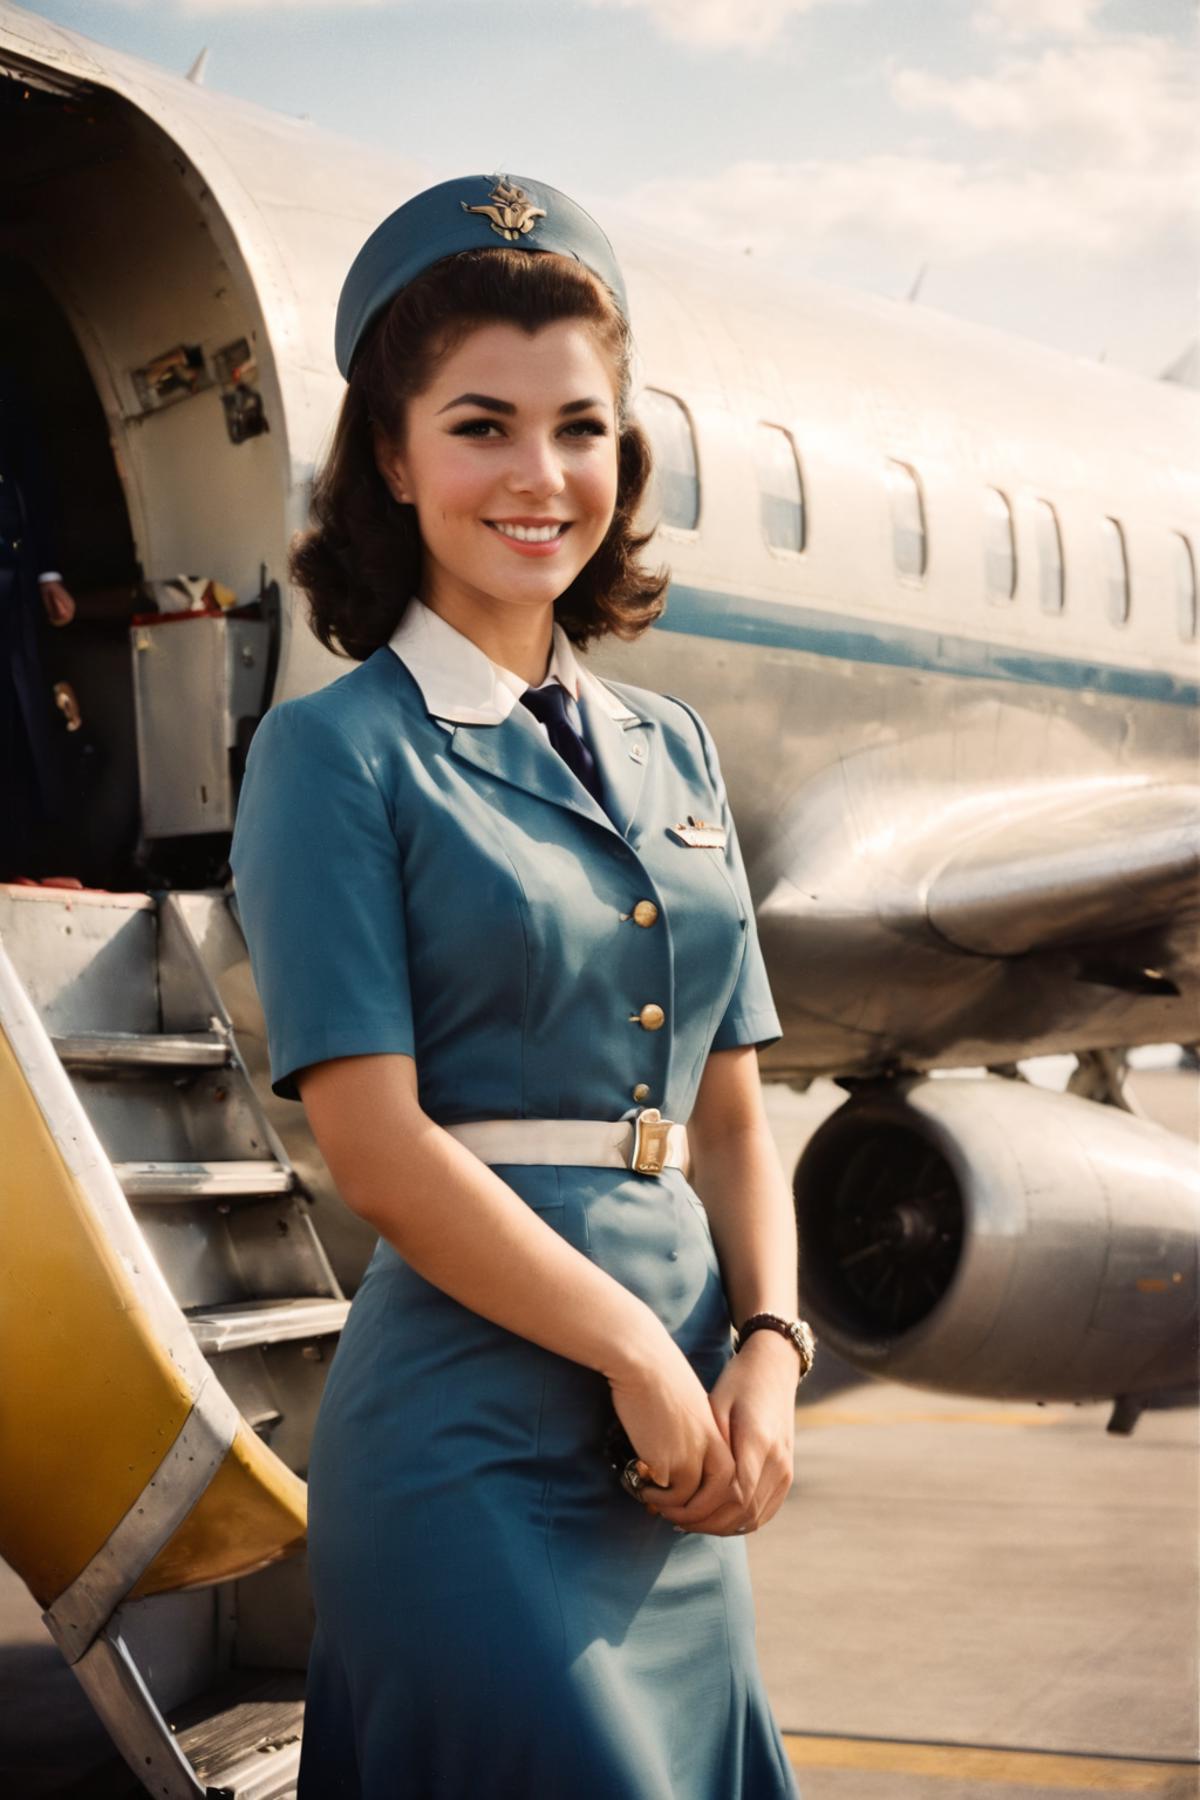 A smiling female airline flight attendant posing in front of a commercial airplane.